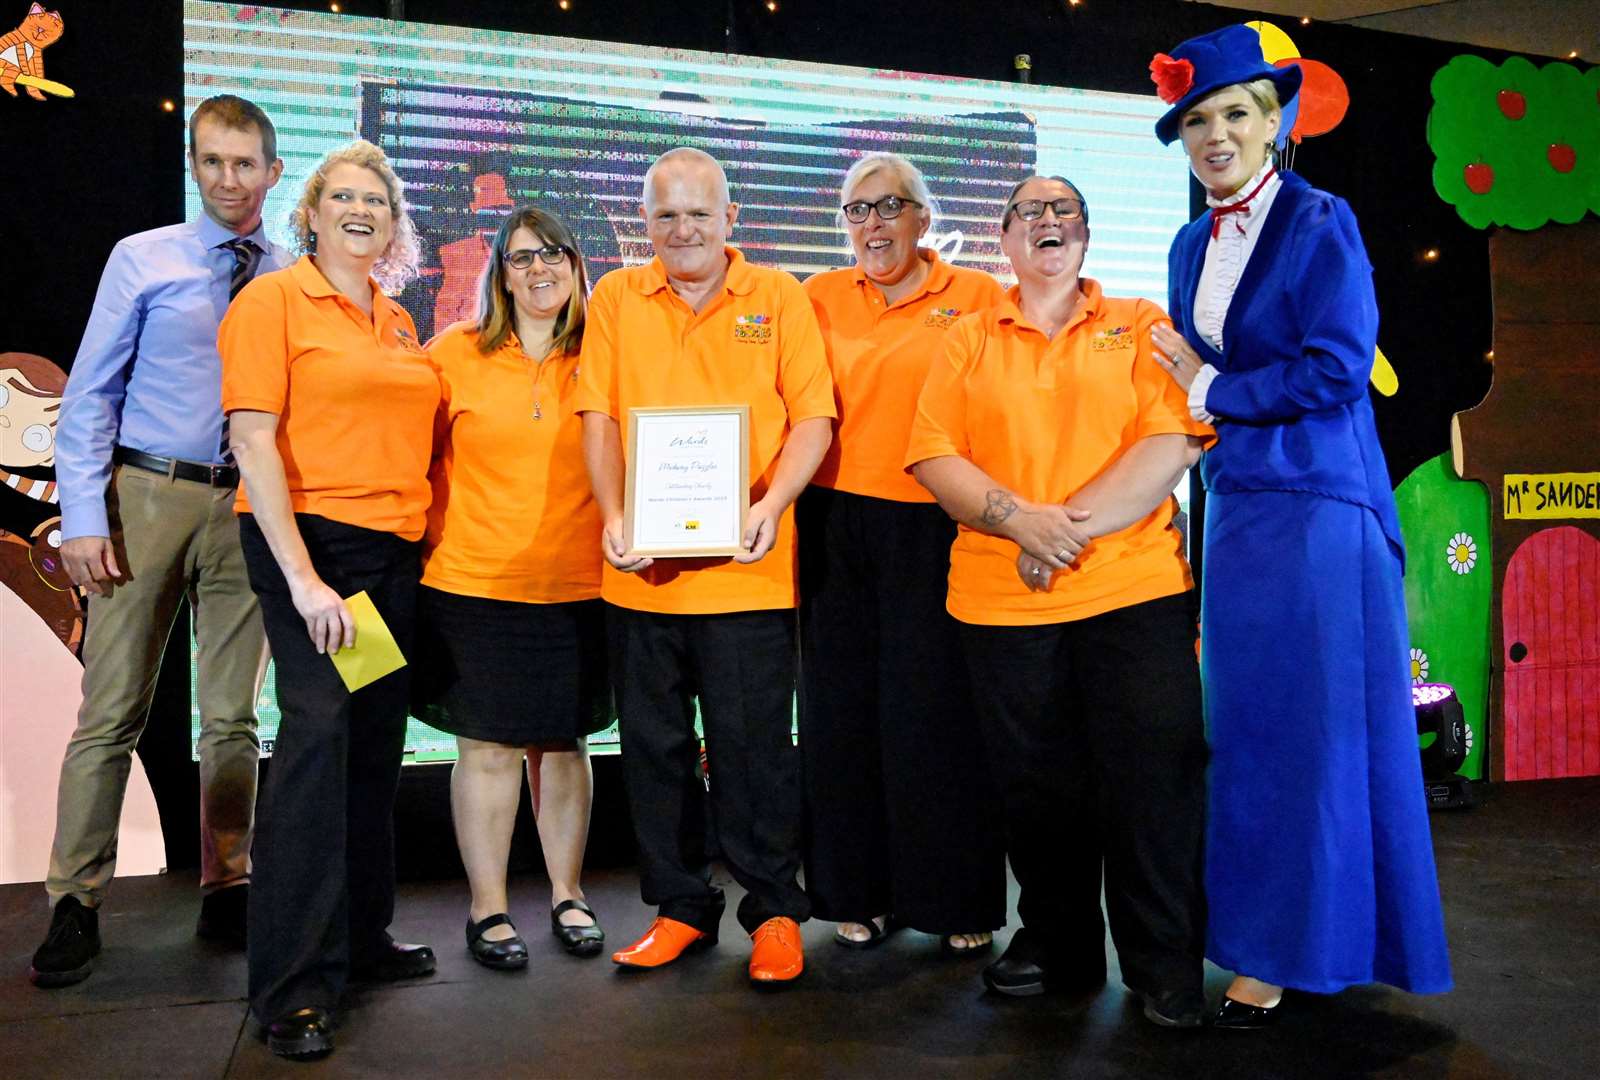 The team from Medway Puzzles won last year’s Outstanding Charity award